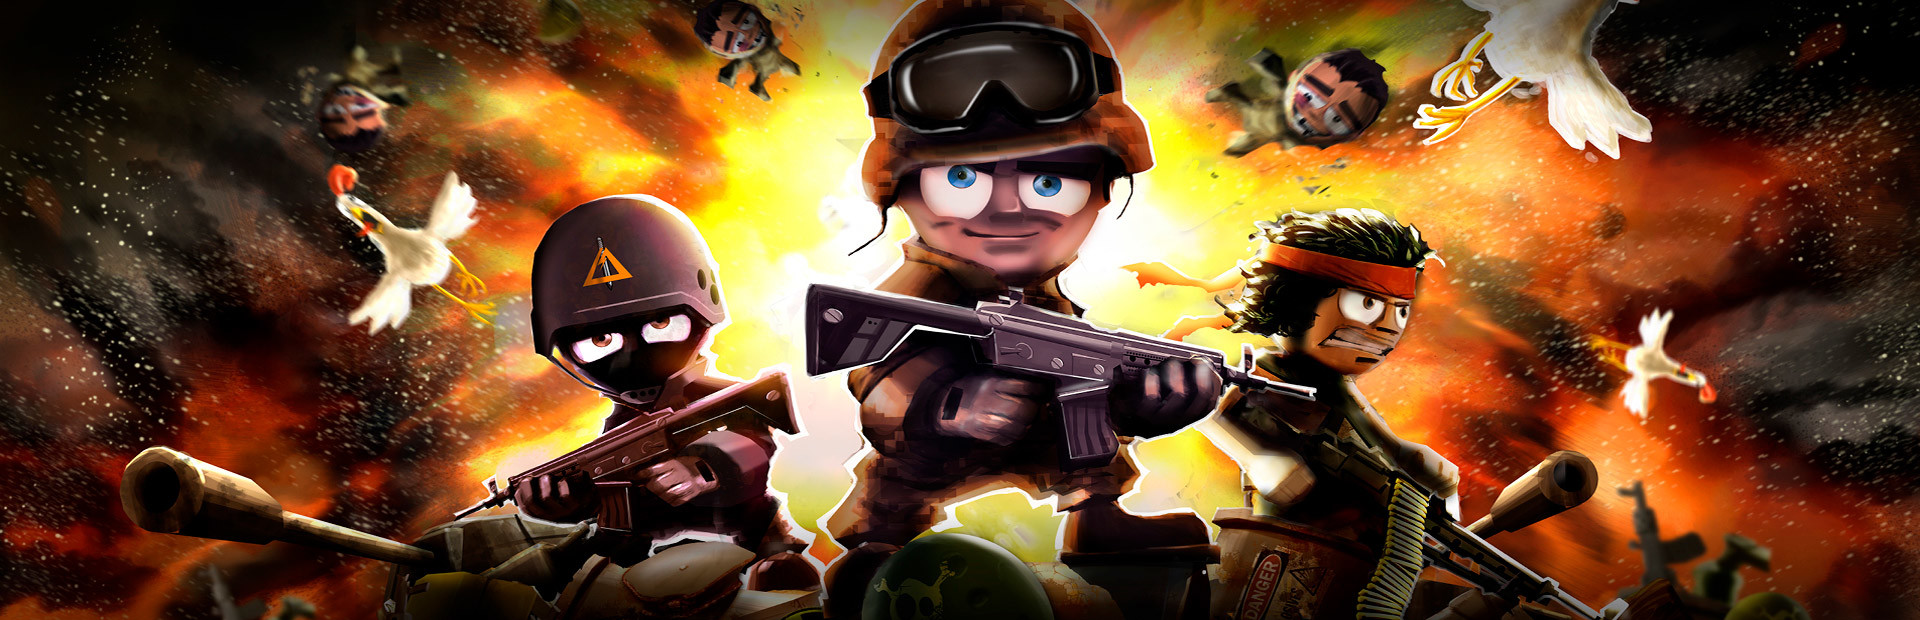 Tiny Troopers cover image